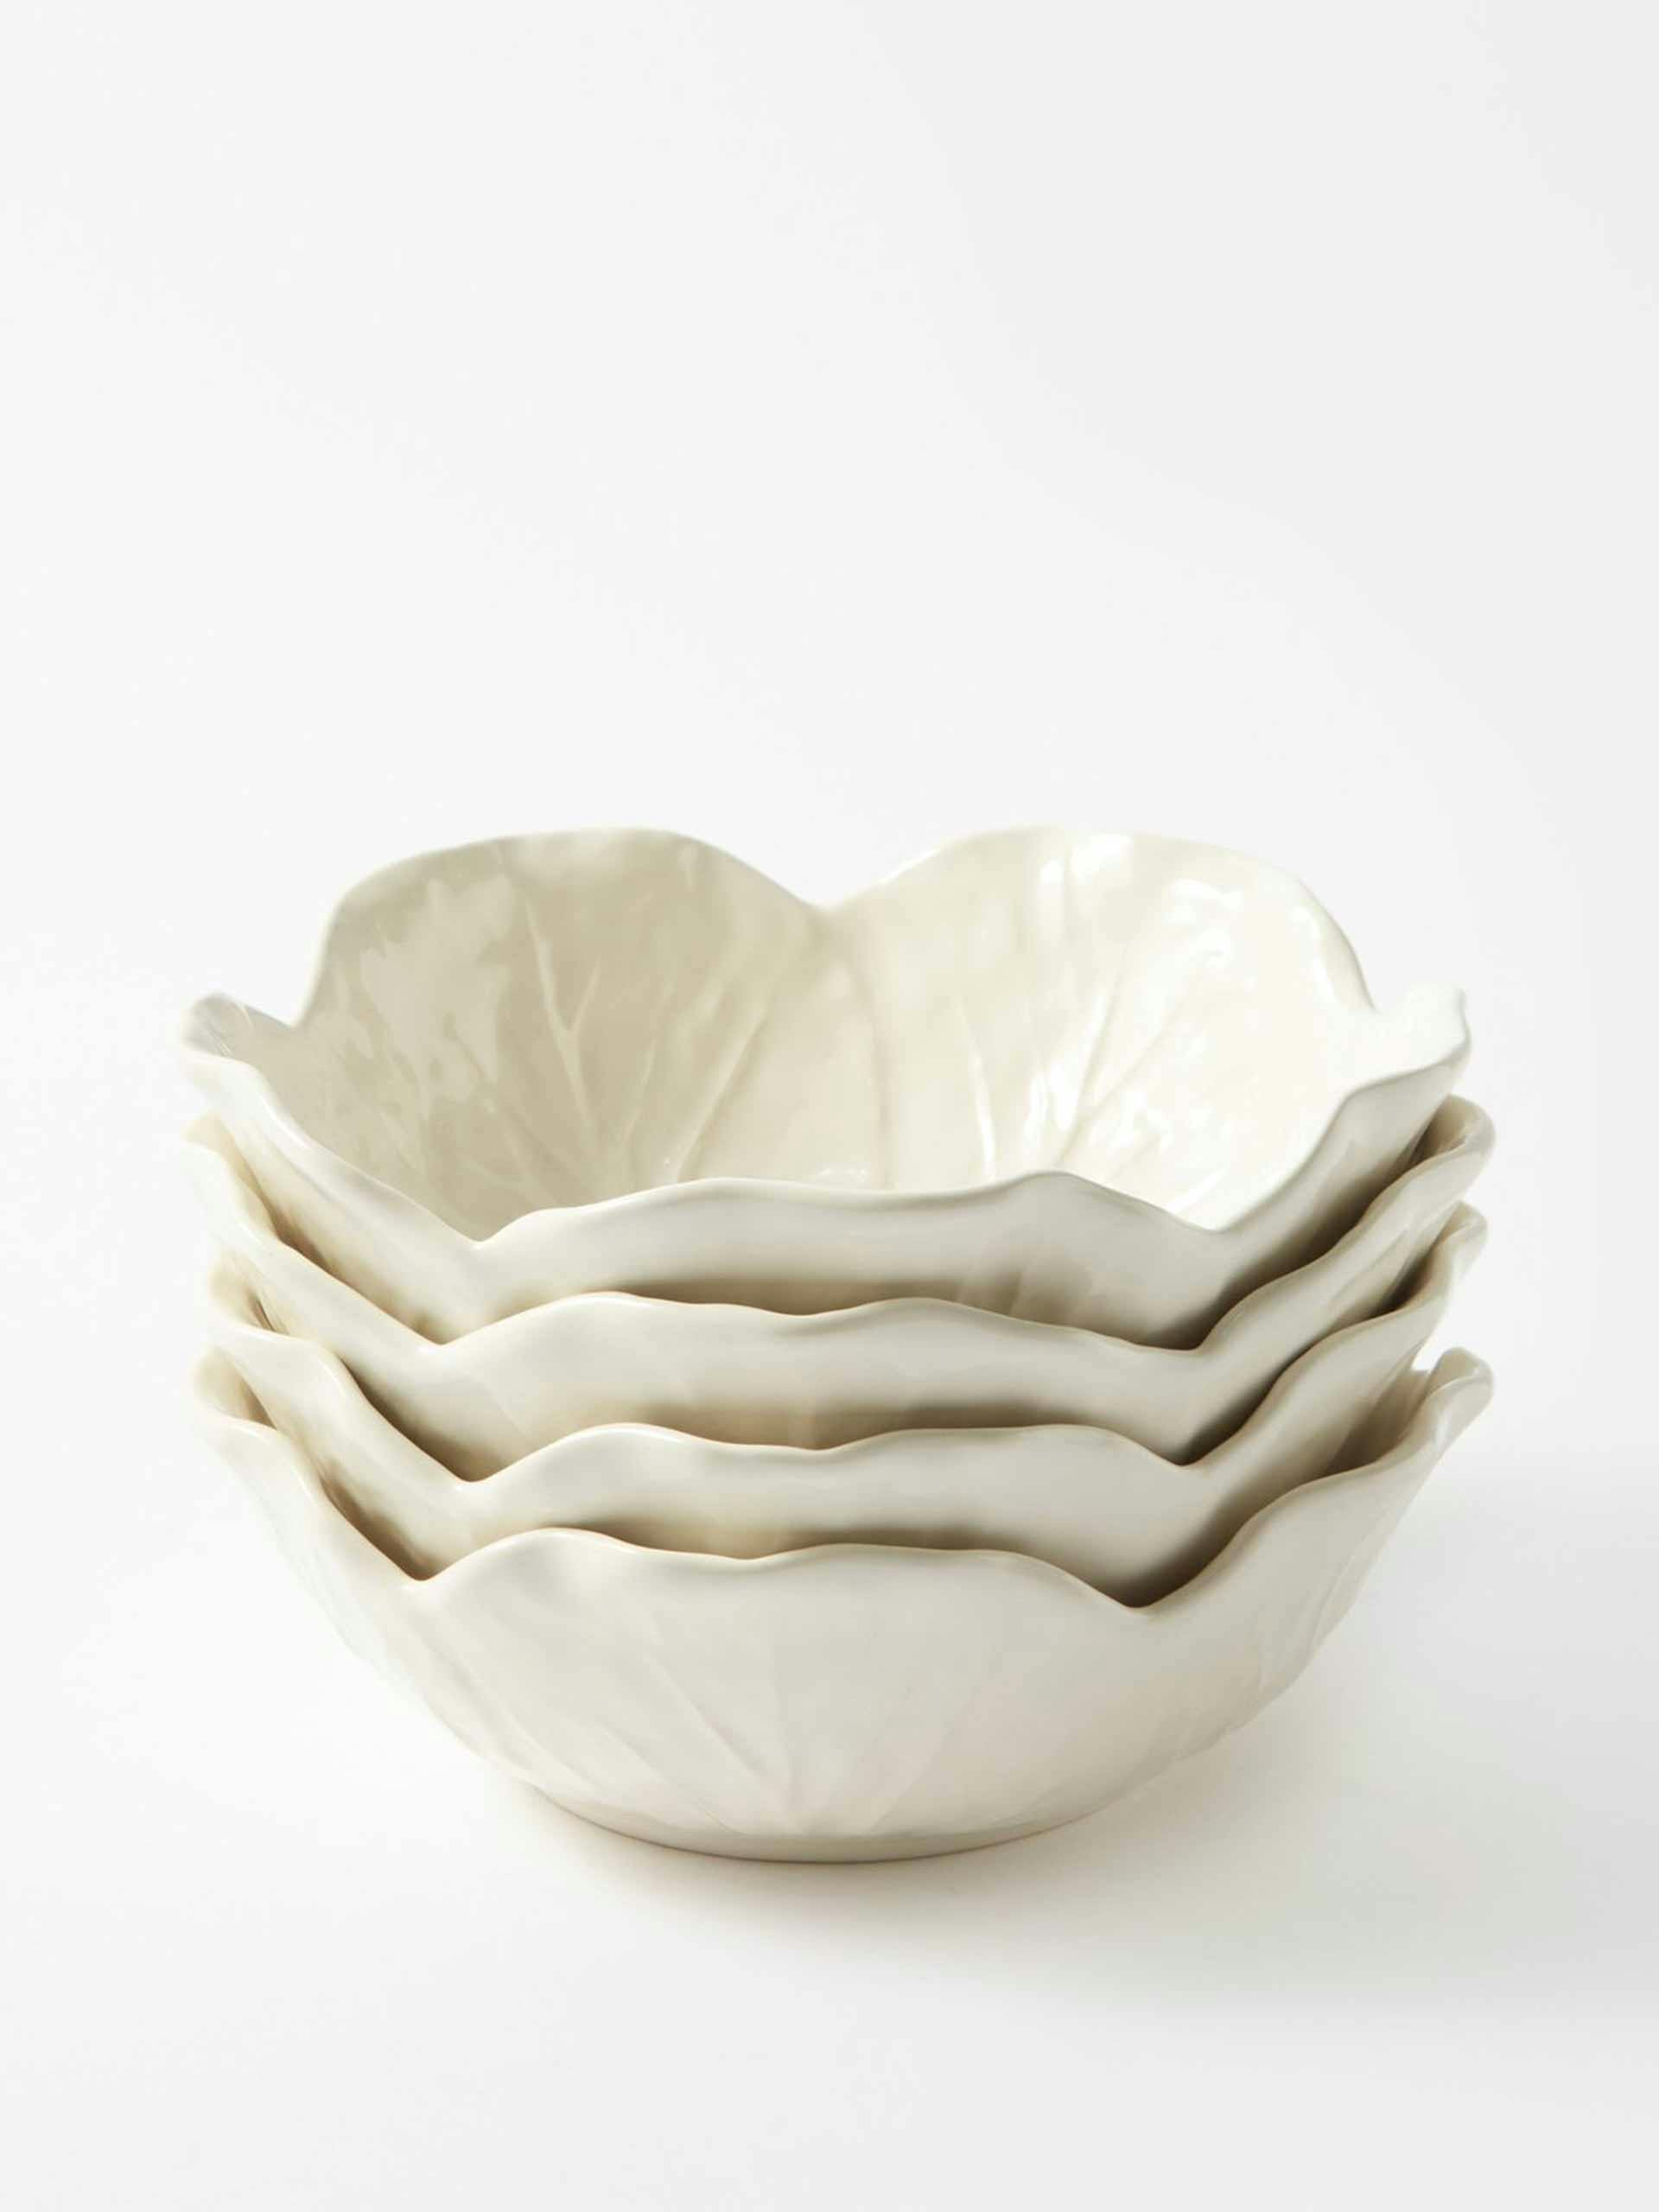 Cabbage earthenware bowls (set of 4)